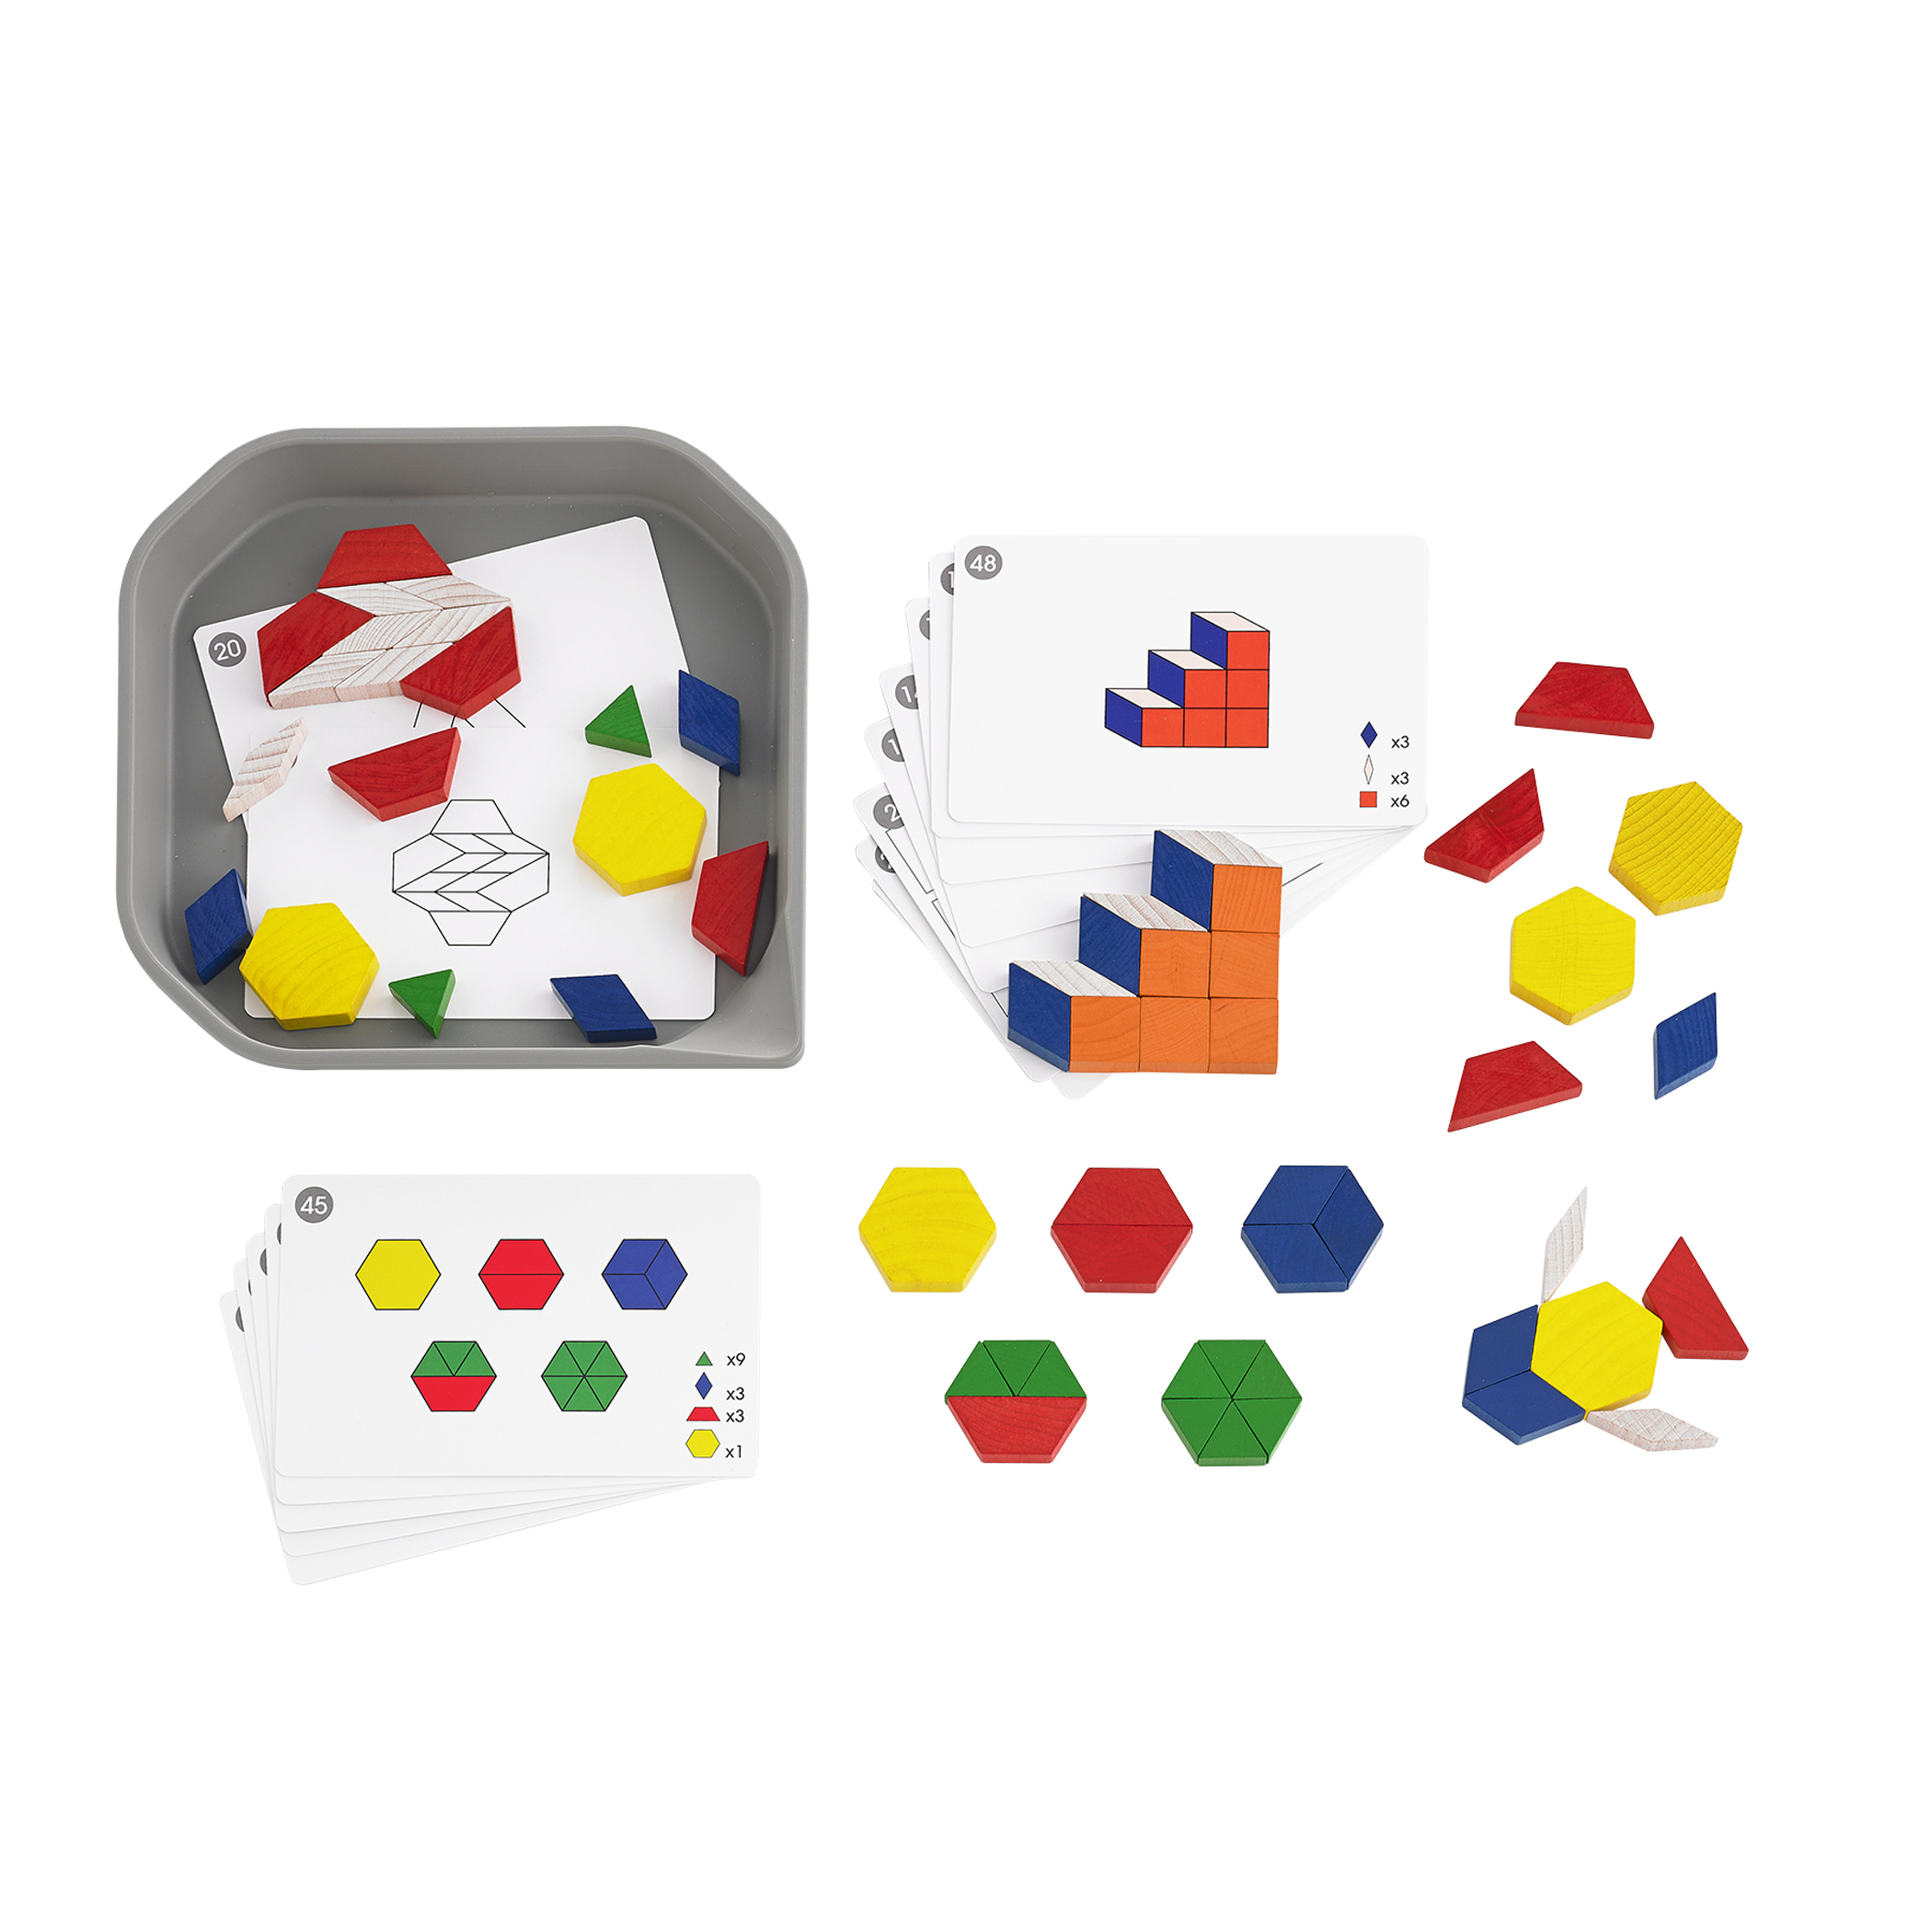 edxeducation FunPlay Pattern Blocks - Set of 60 Wooden Math Manipulatives + 50 Activities + Messy Tray image number null